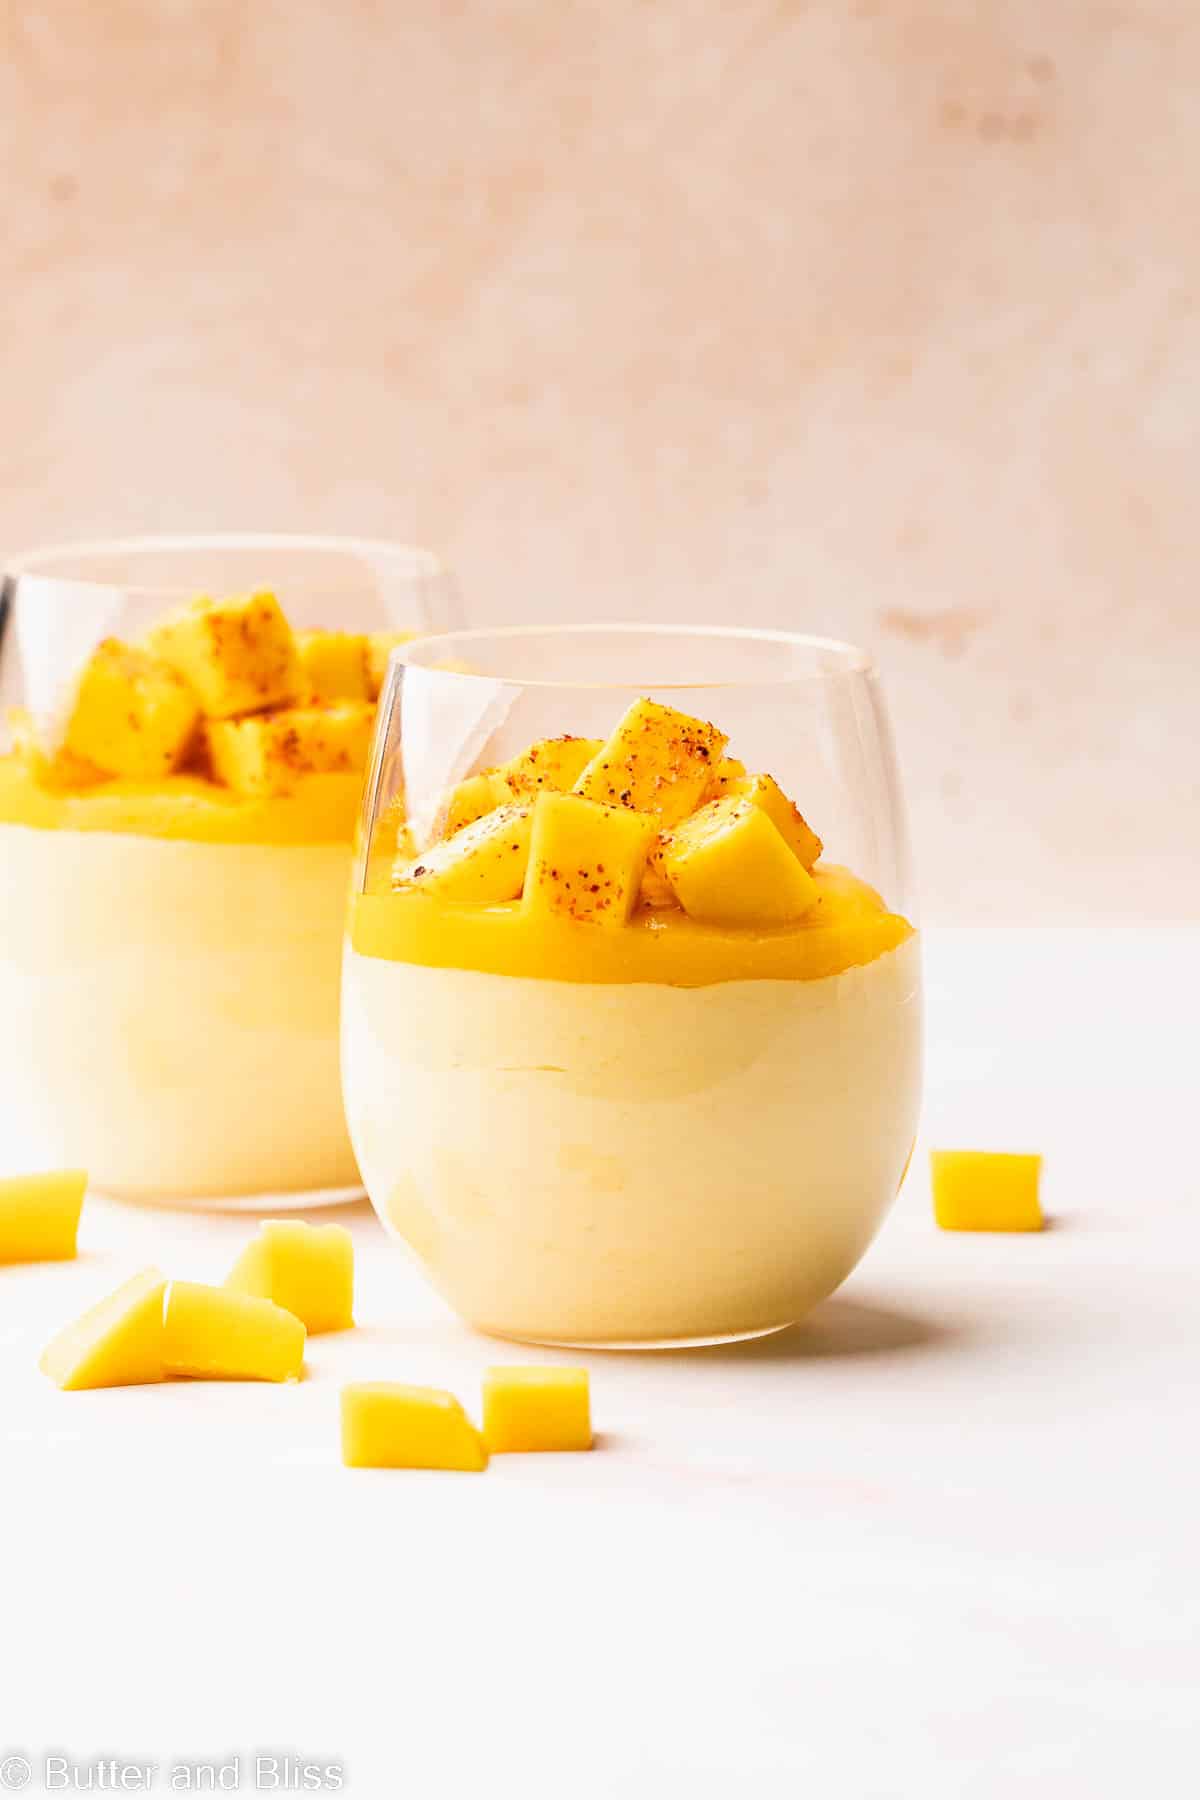 Creamy mango mousse in a parfait glass with a layer of mango puree and mango chunks.